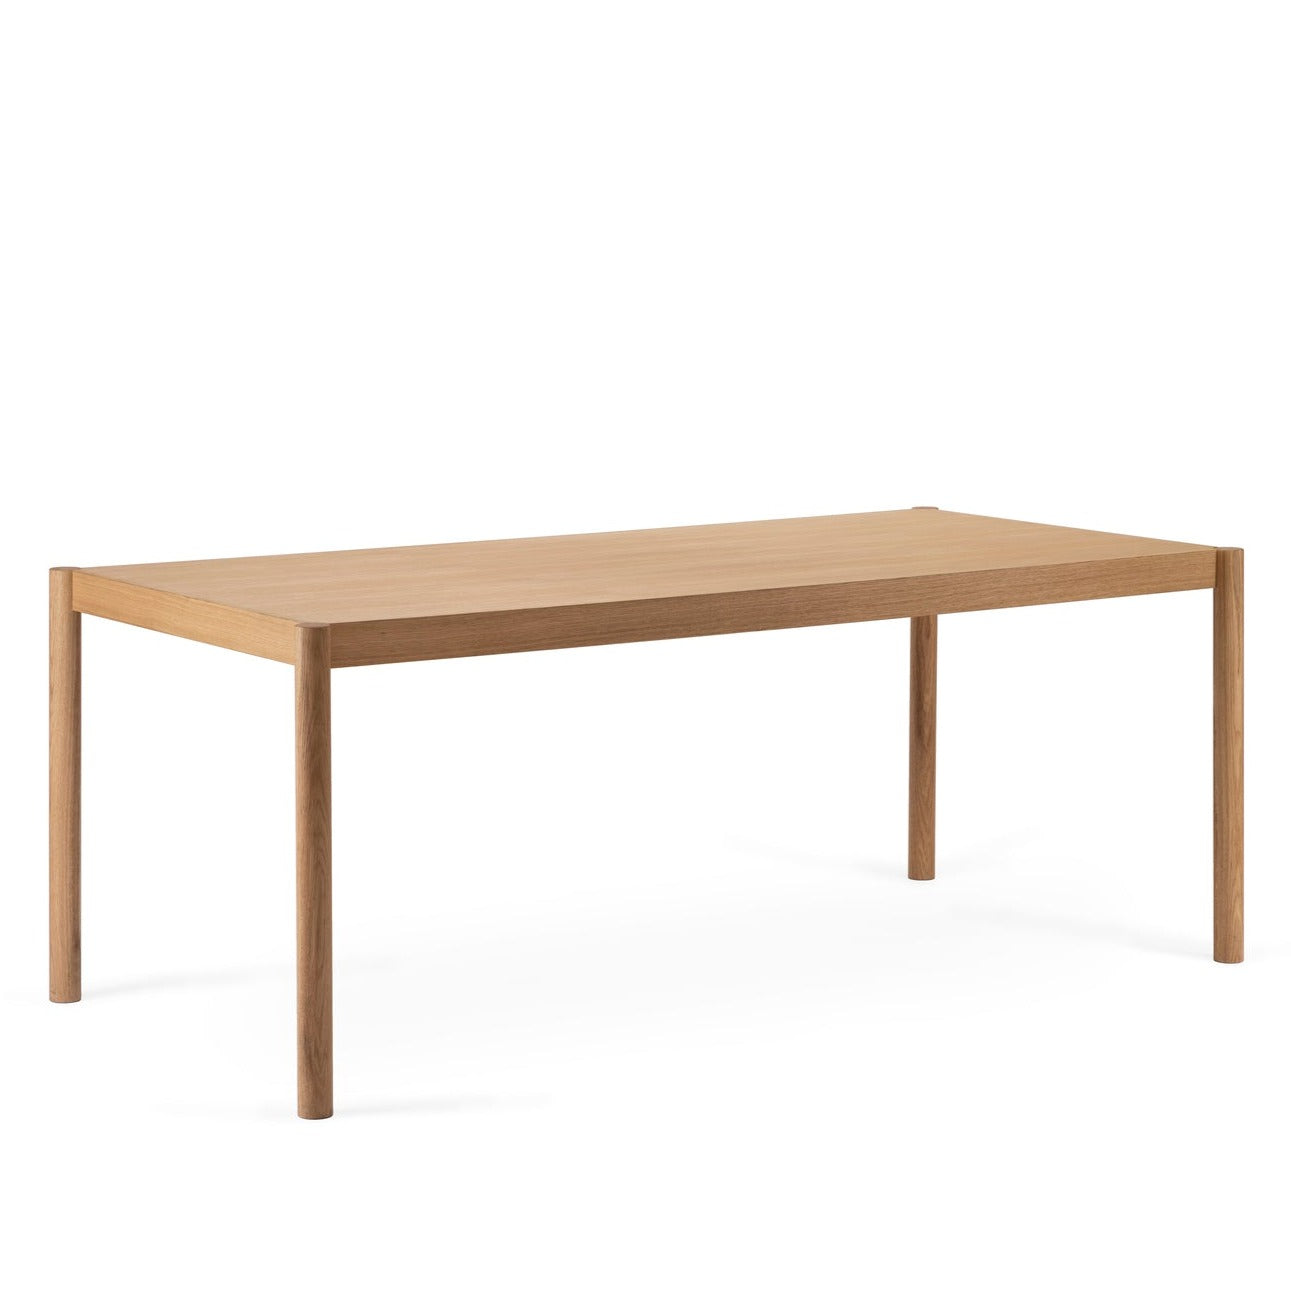 CITIZEN Dining Table-natural oak-large size side view